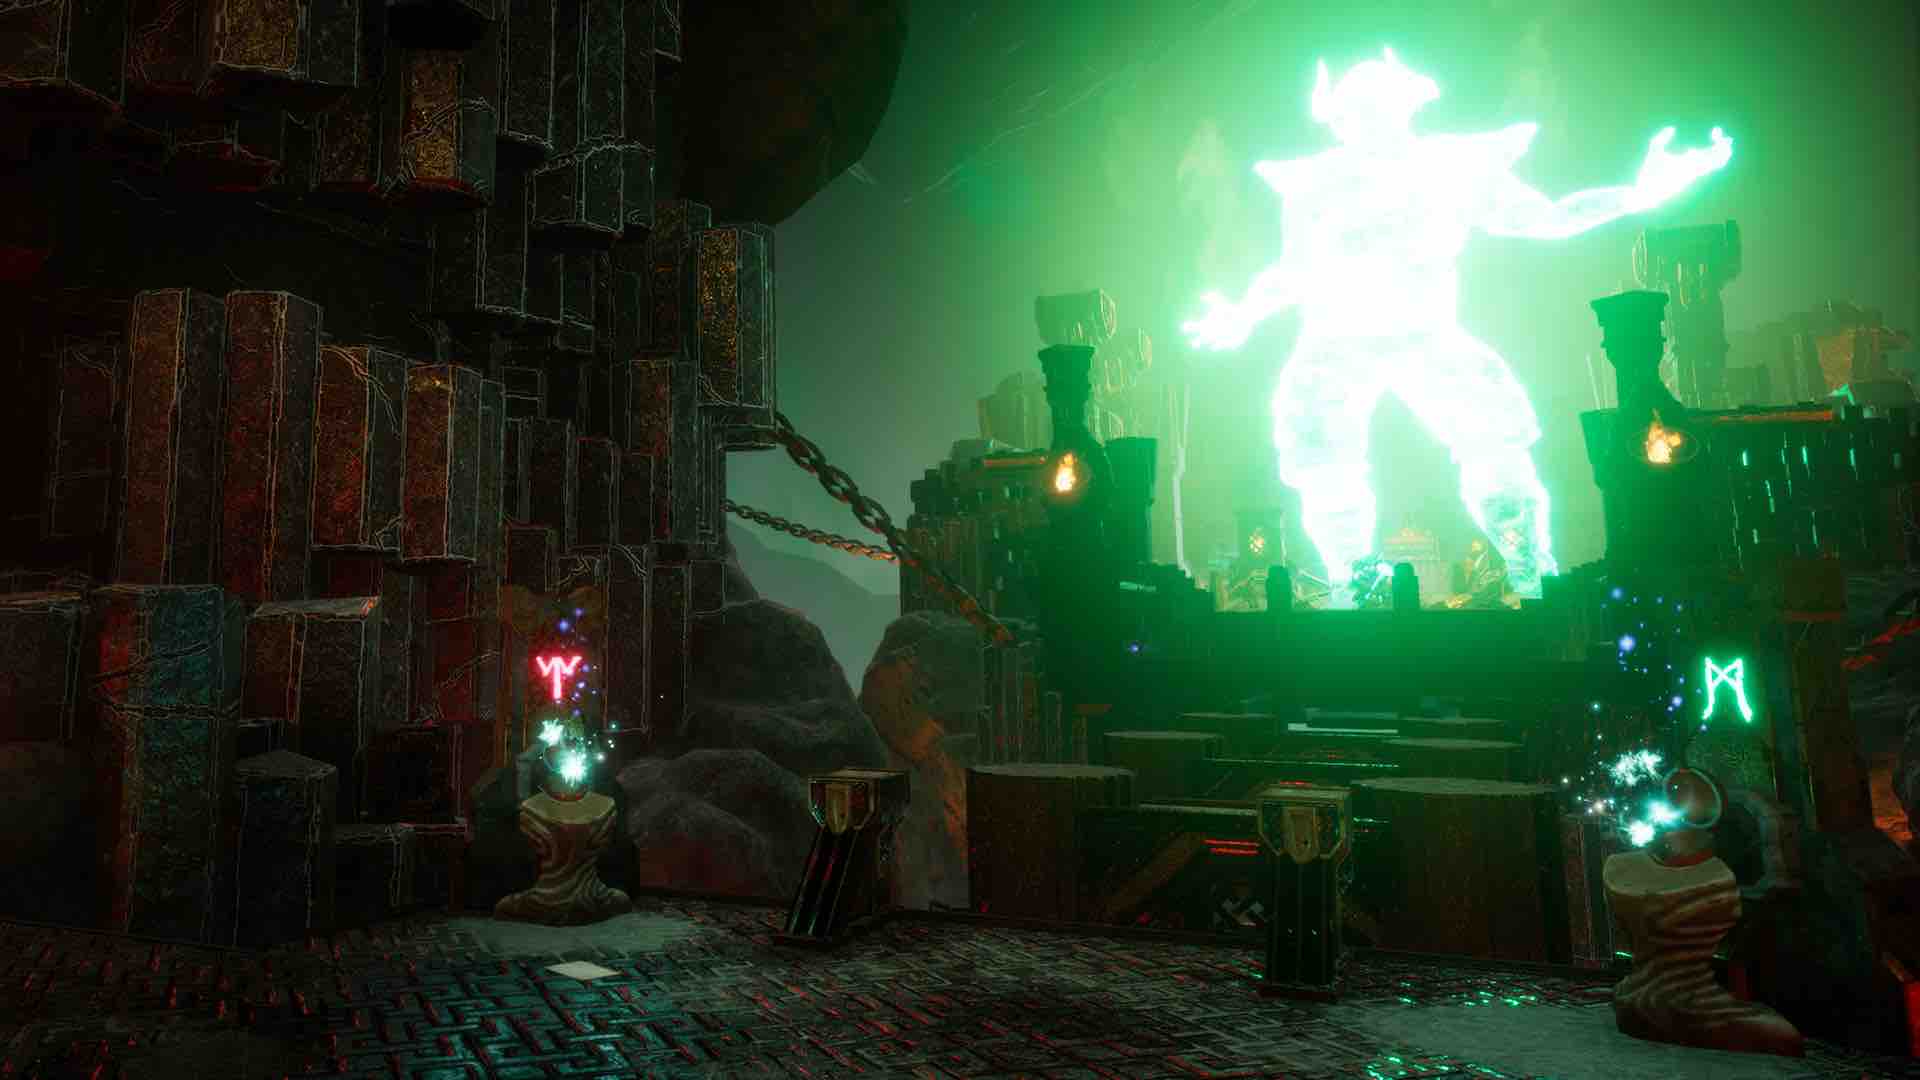 The Bard's Tale IV: Cut PS4 Review - Universe